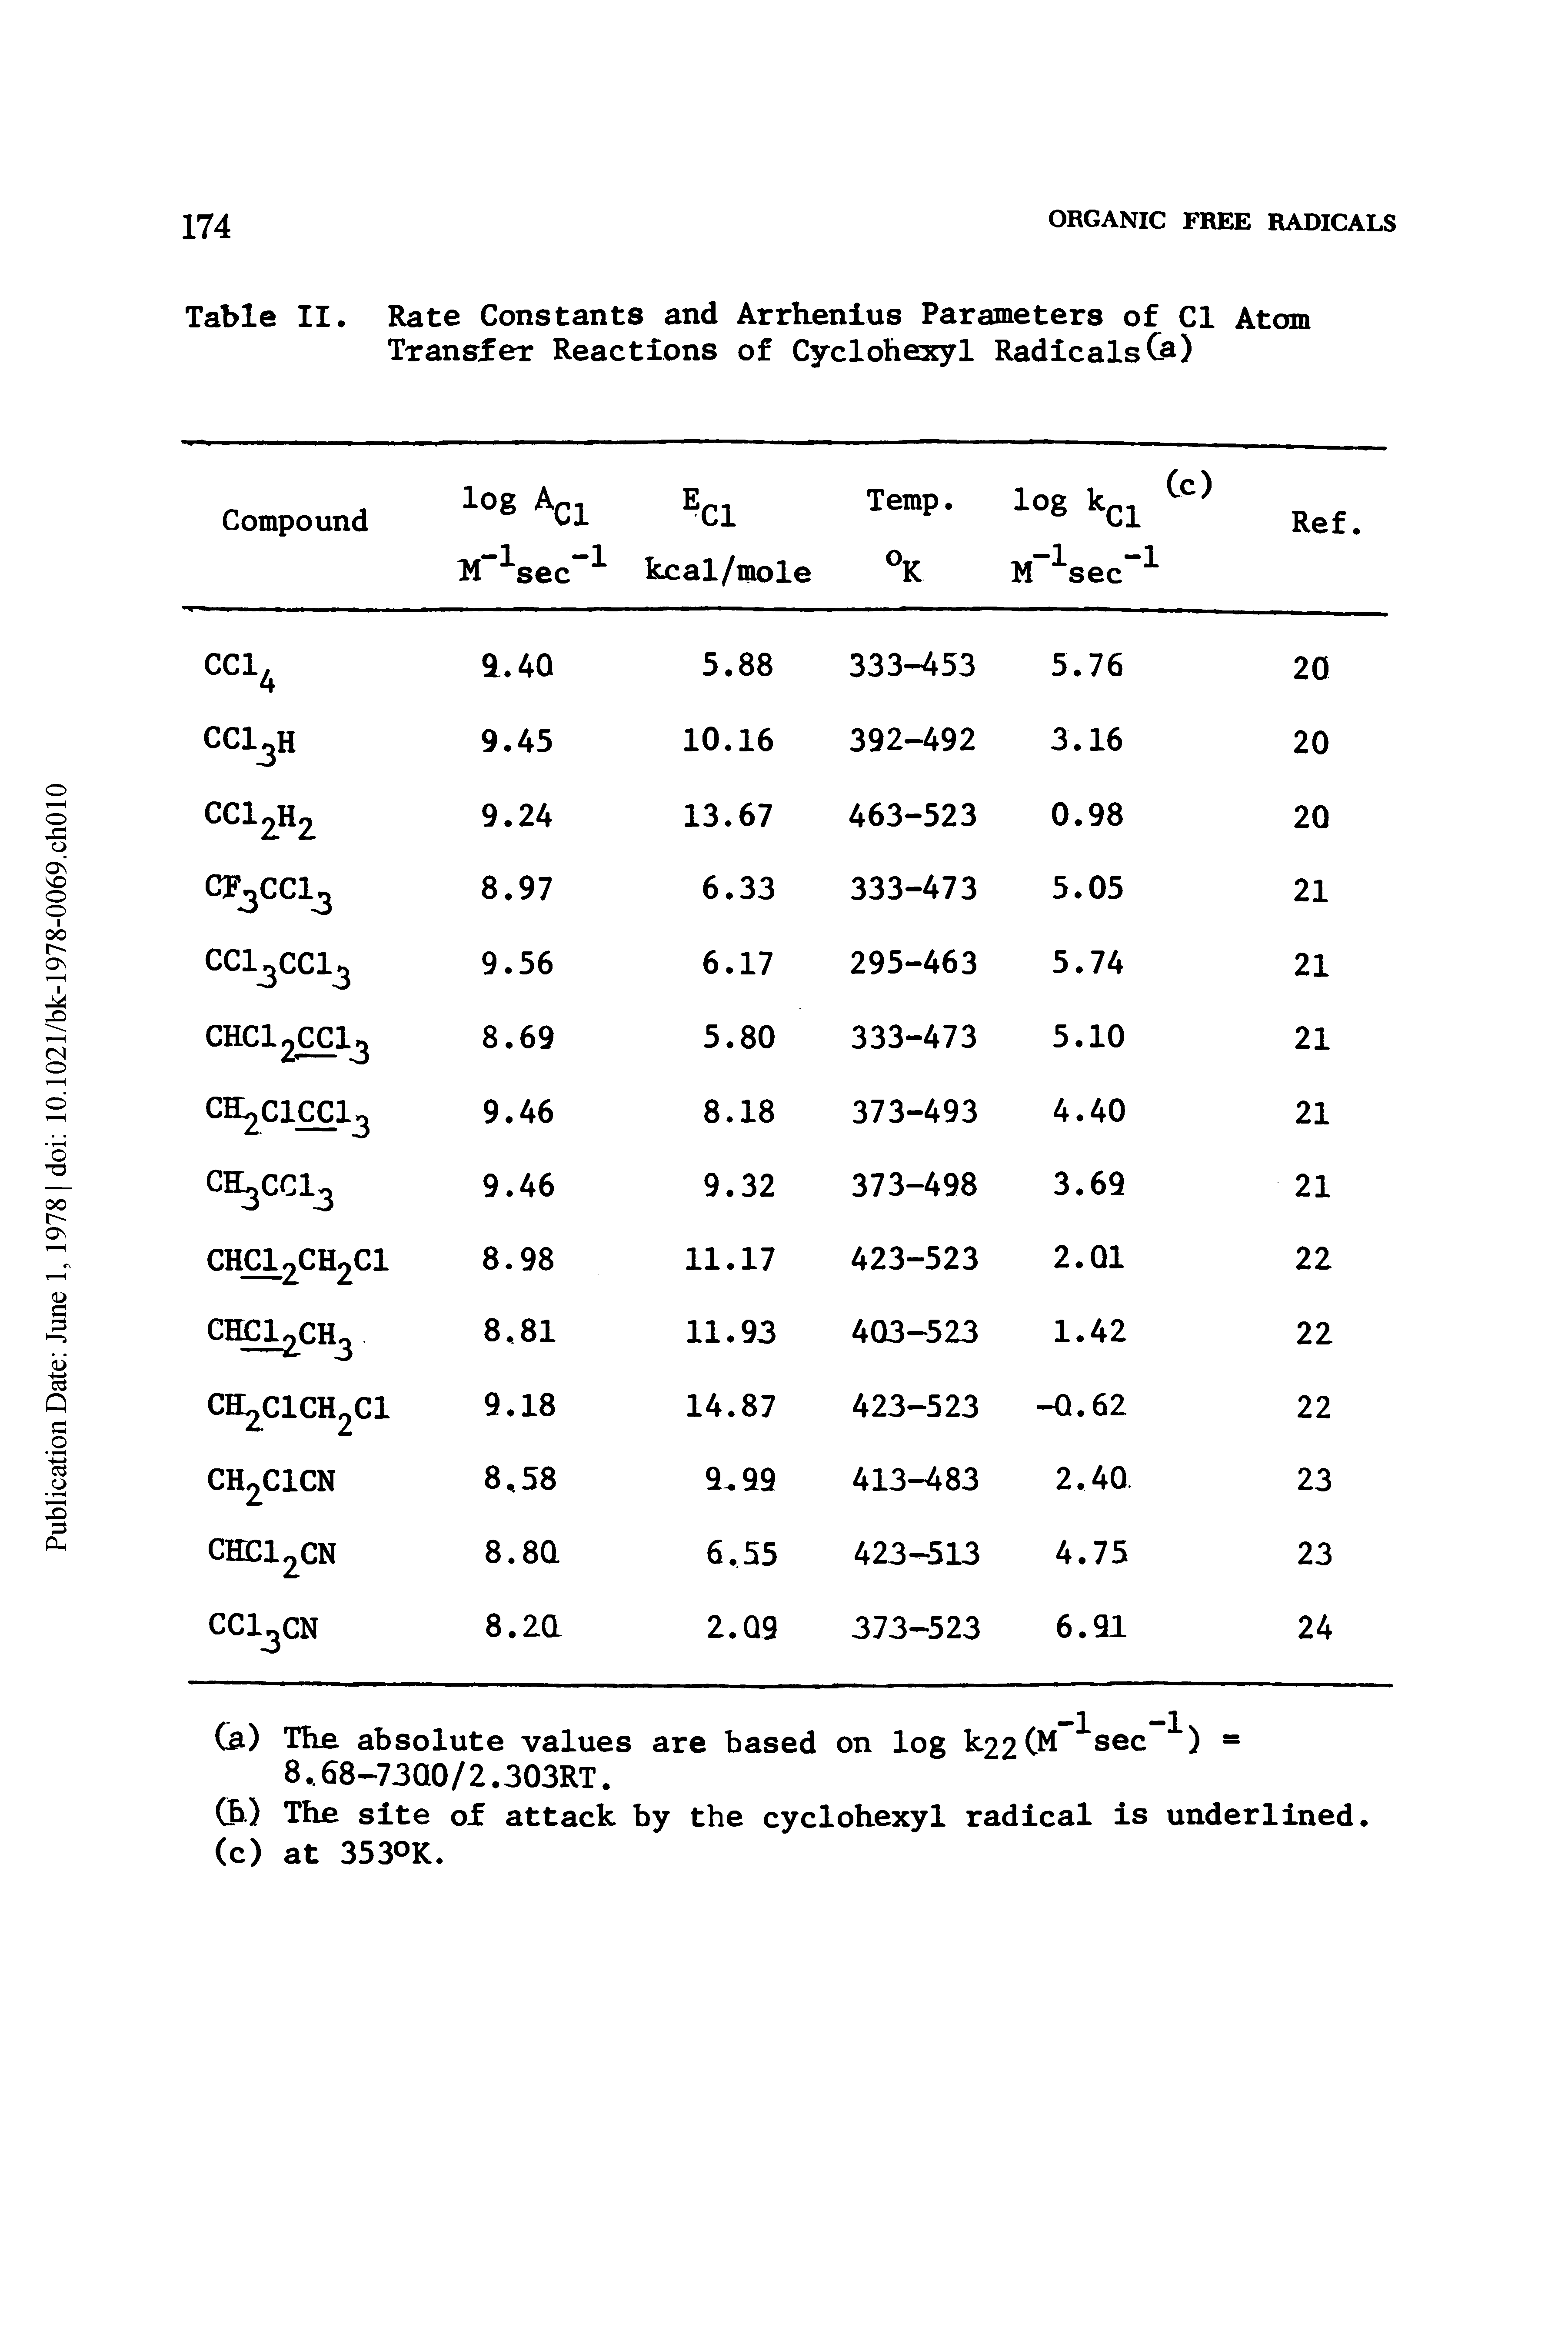 Table II. Rate Constants and Arrhenius Parameters of Cl Atom Transfer Reactions of Cyclohexyl Radicals Ce)...